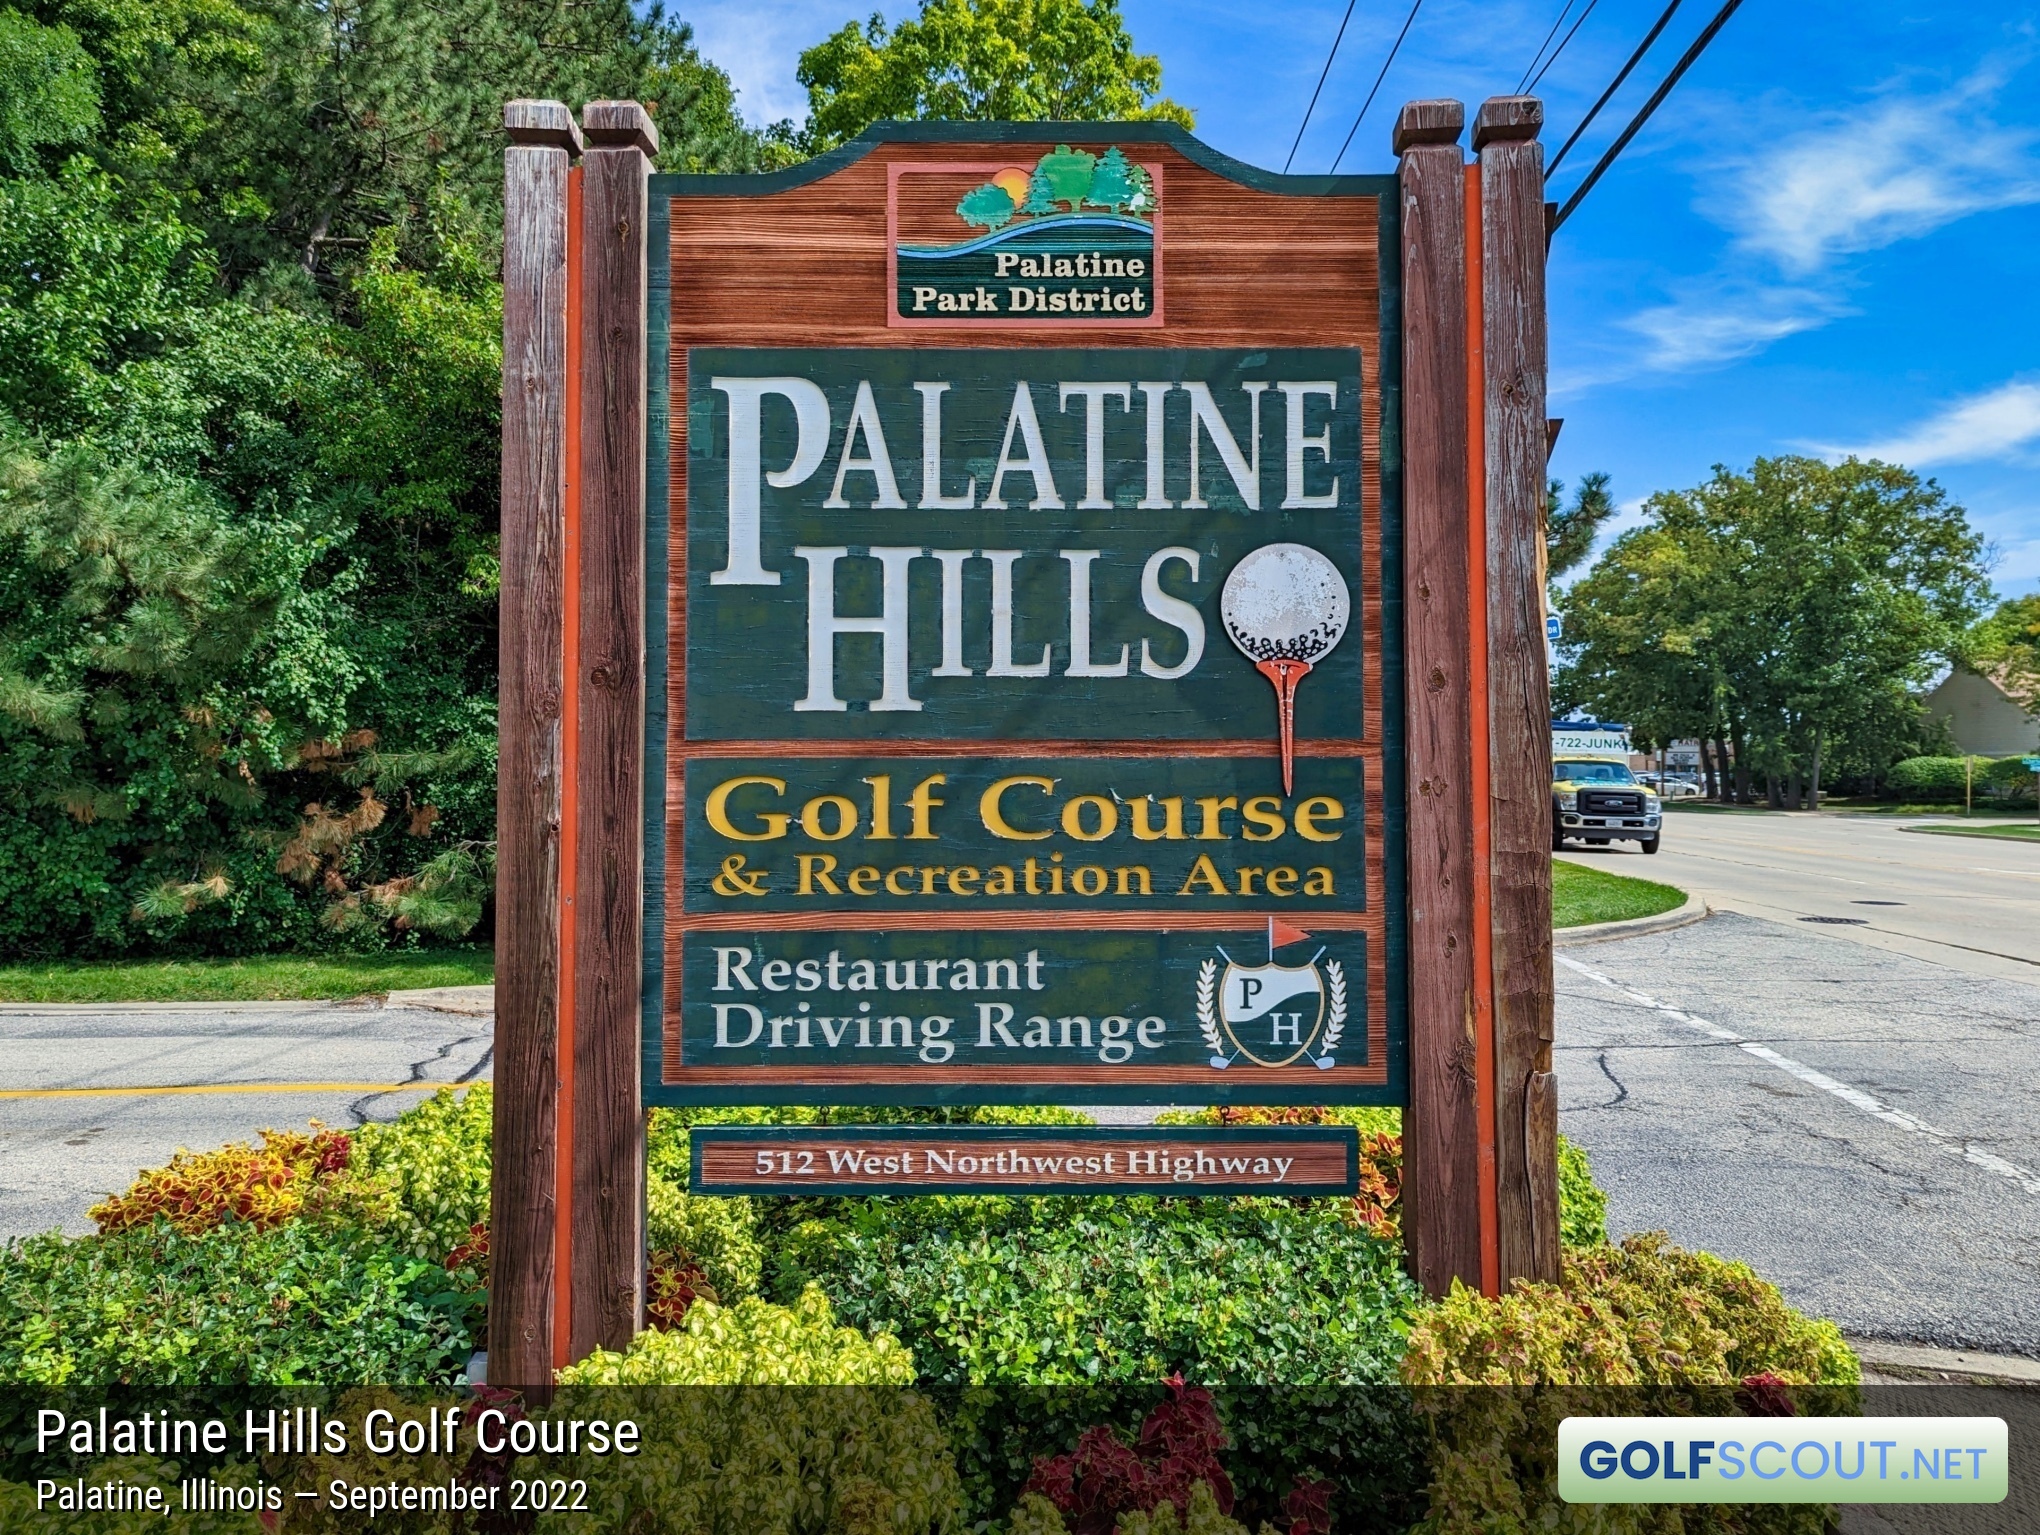 Sign at the entrance to Palatine Hills Golf Course